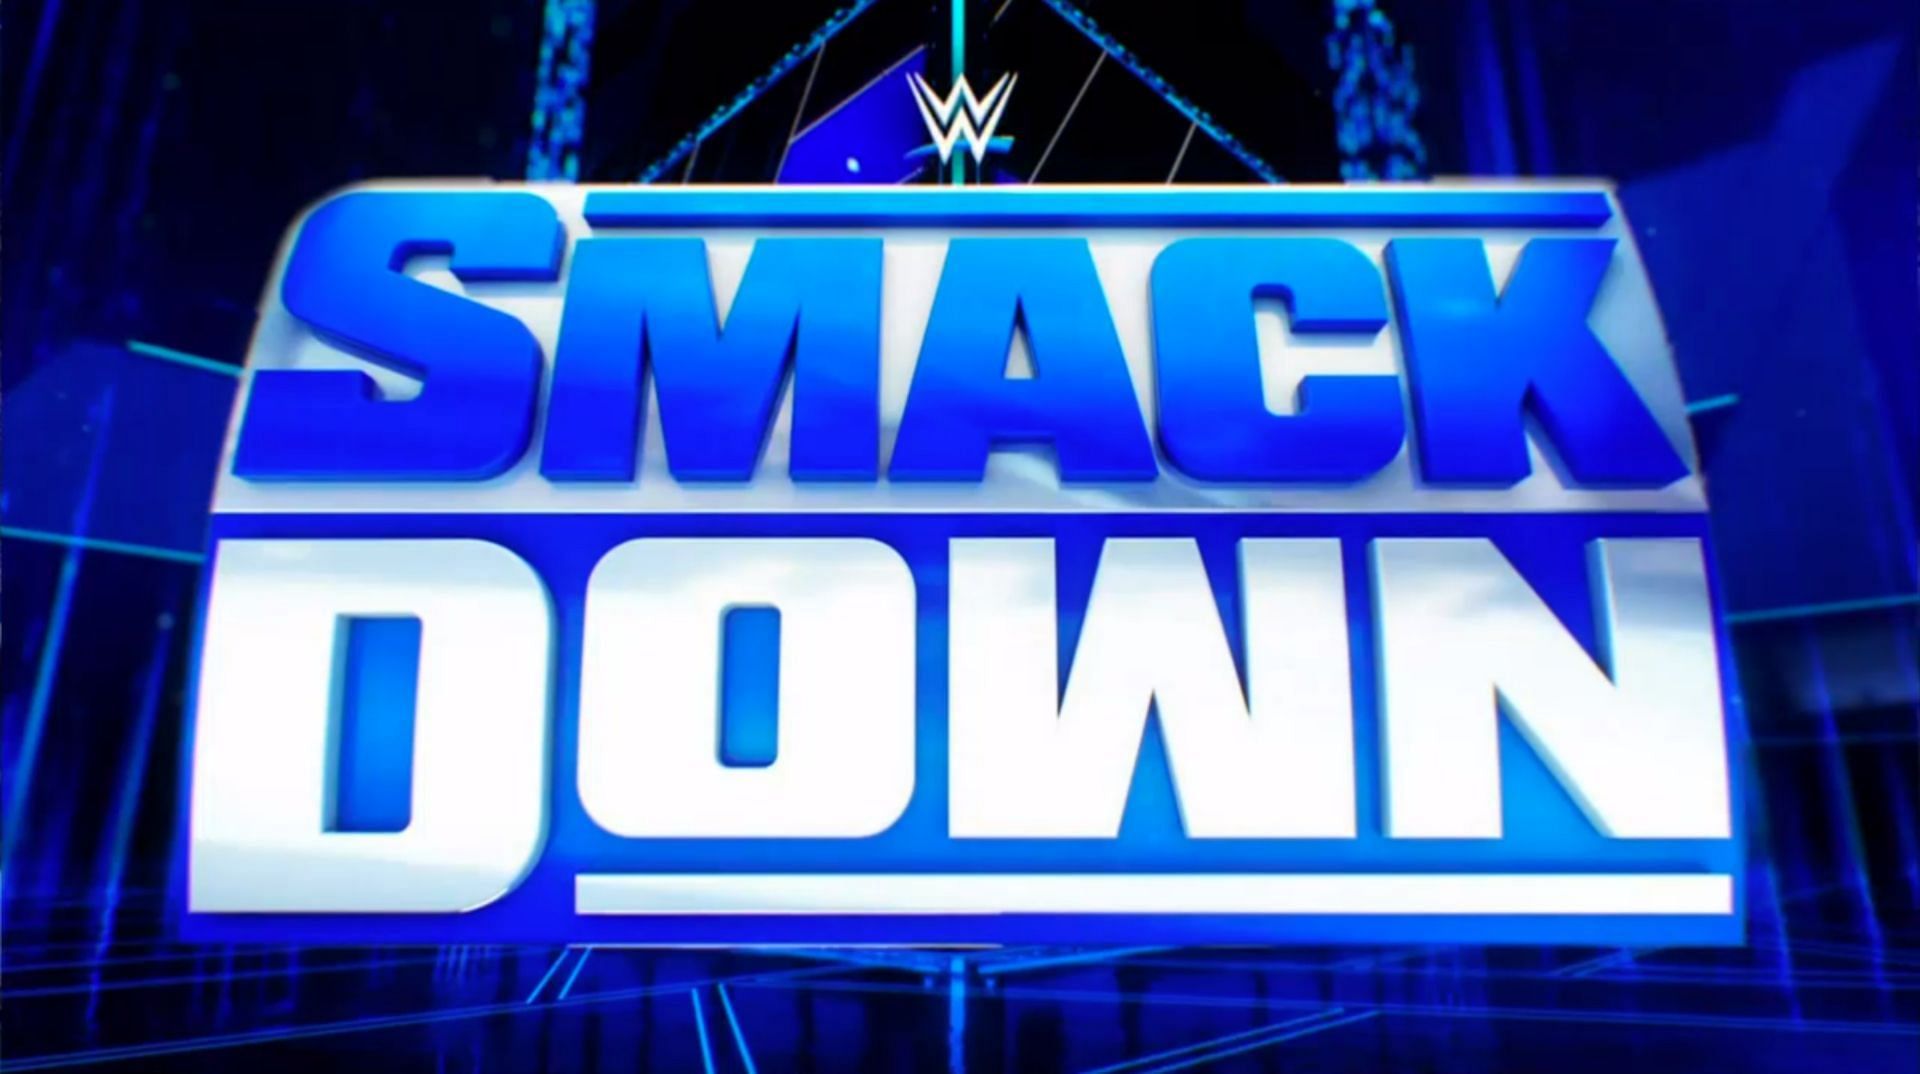 A SmackDown star is rumored to be making their WWE return